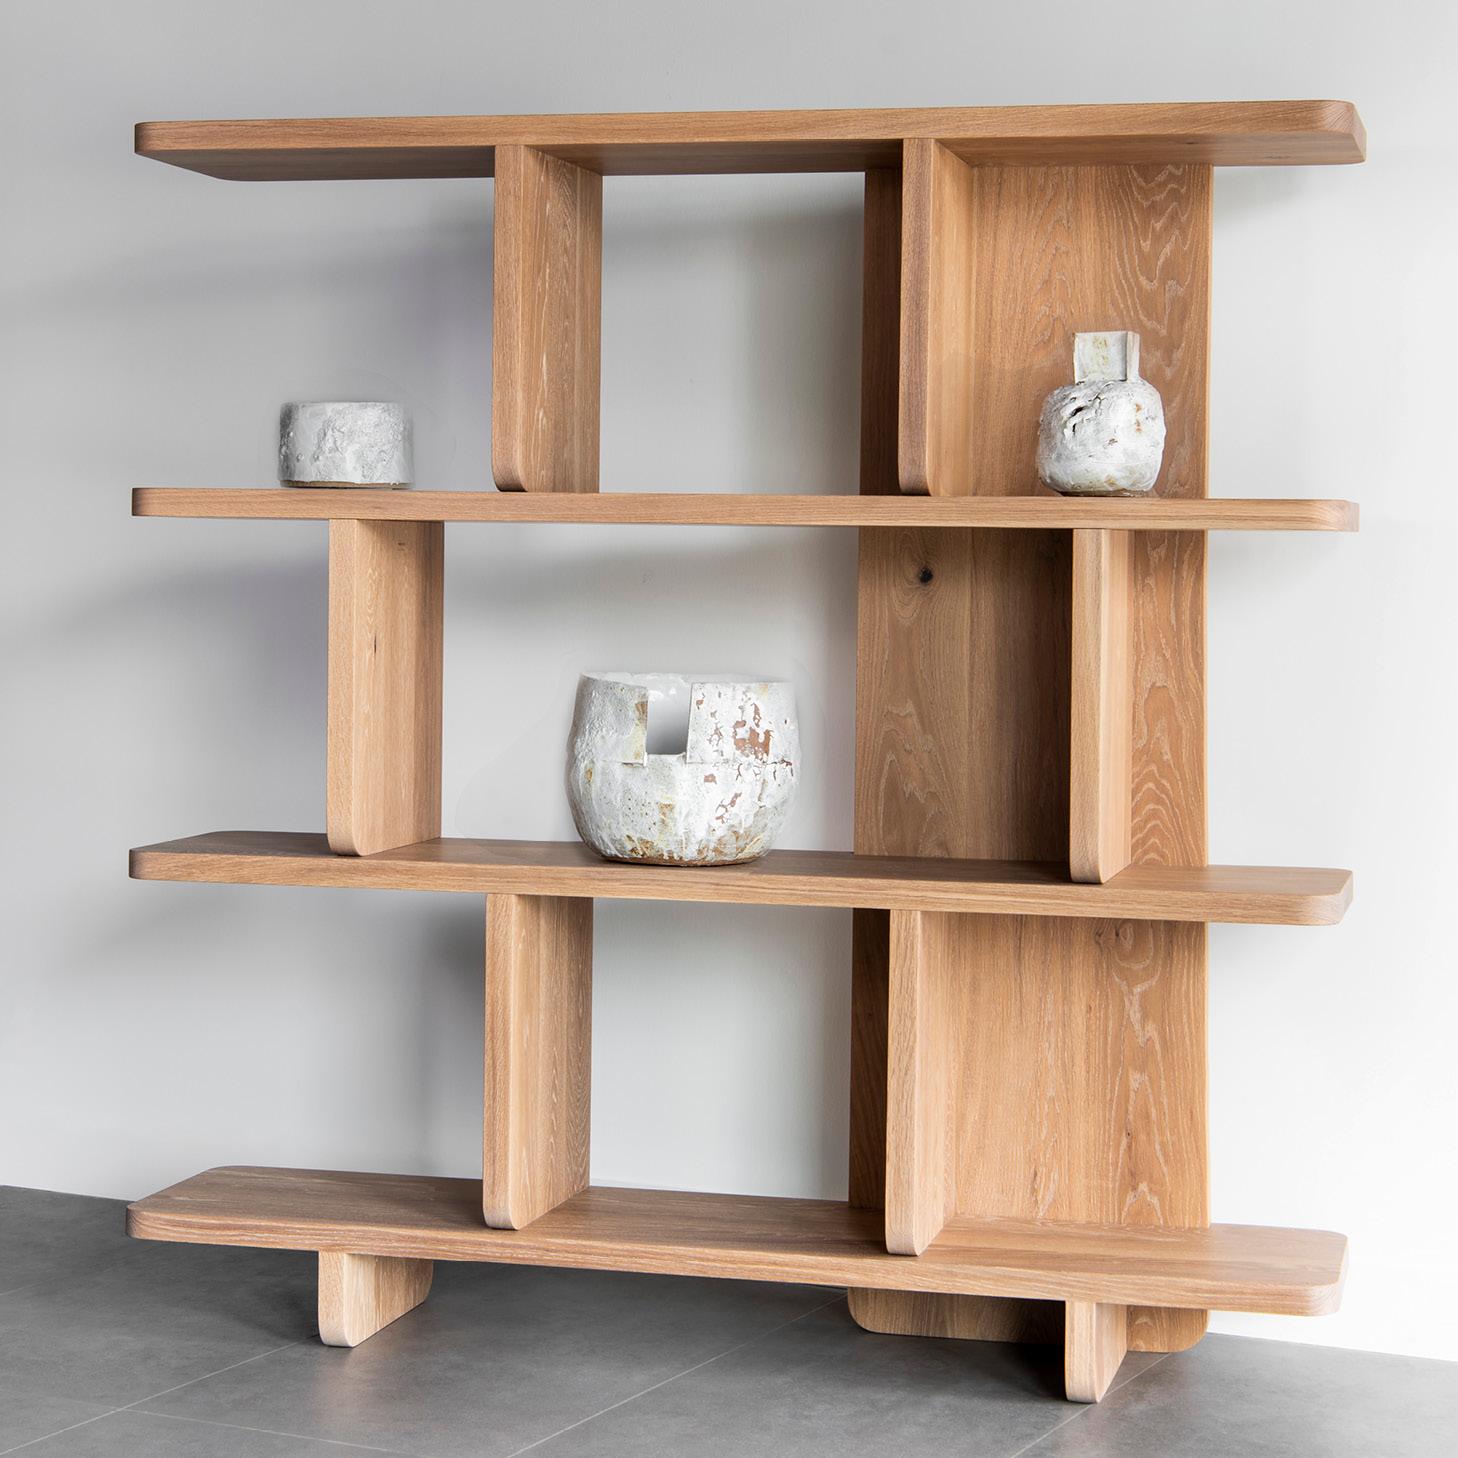 The Provide Series Furniture Collection was created in collaboration with David Keeler of Provide and Lock & Mortice. The Provide Series is a distinctive collection of solid wood furniture pieces for modern living. 

Lock & Mortice is a Vancouver